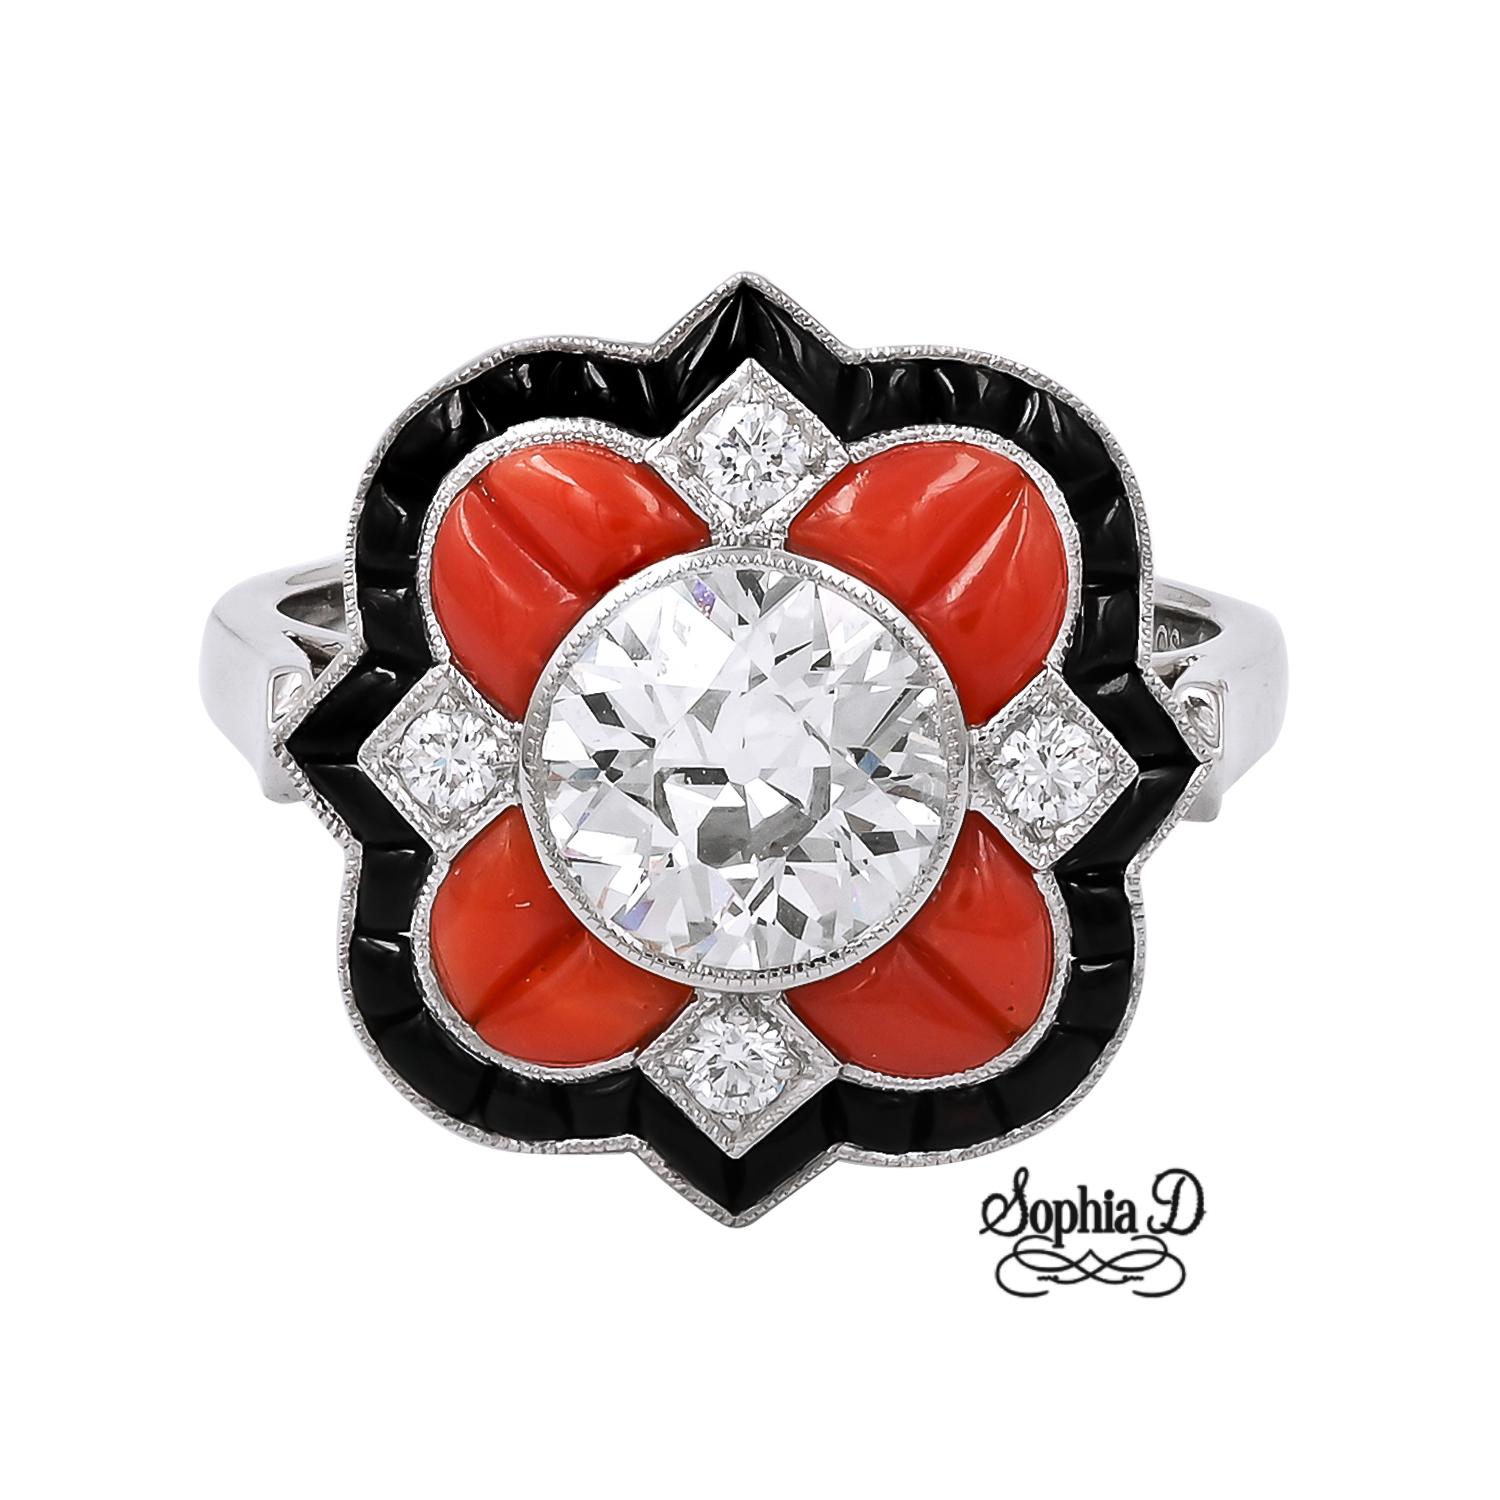 Diamonds, corals and onyx art deco ring by Sophia D. Set with a 1.23 carat round cut diamond and onyx and coral that total 0.75 carats in platinum setting. 

The ring is a size 6.5 and available for resizing.

Sophia D by Joseph Dardashti LTD has